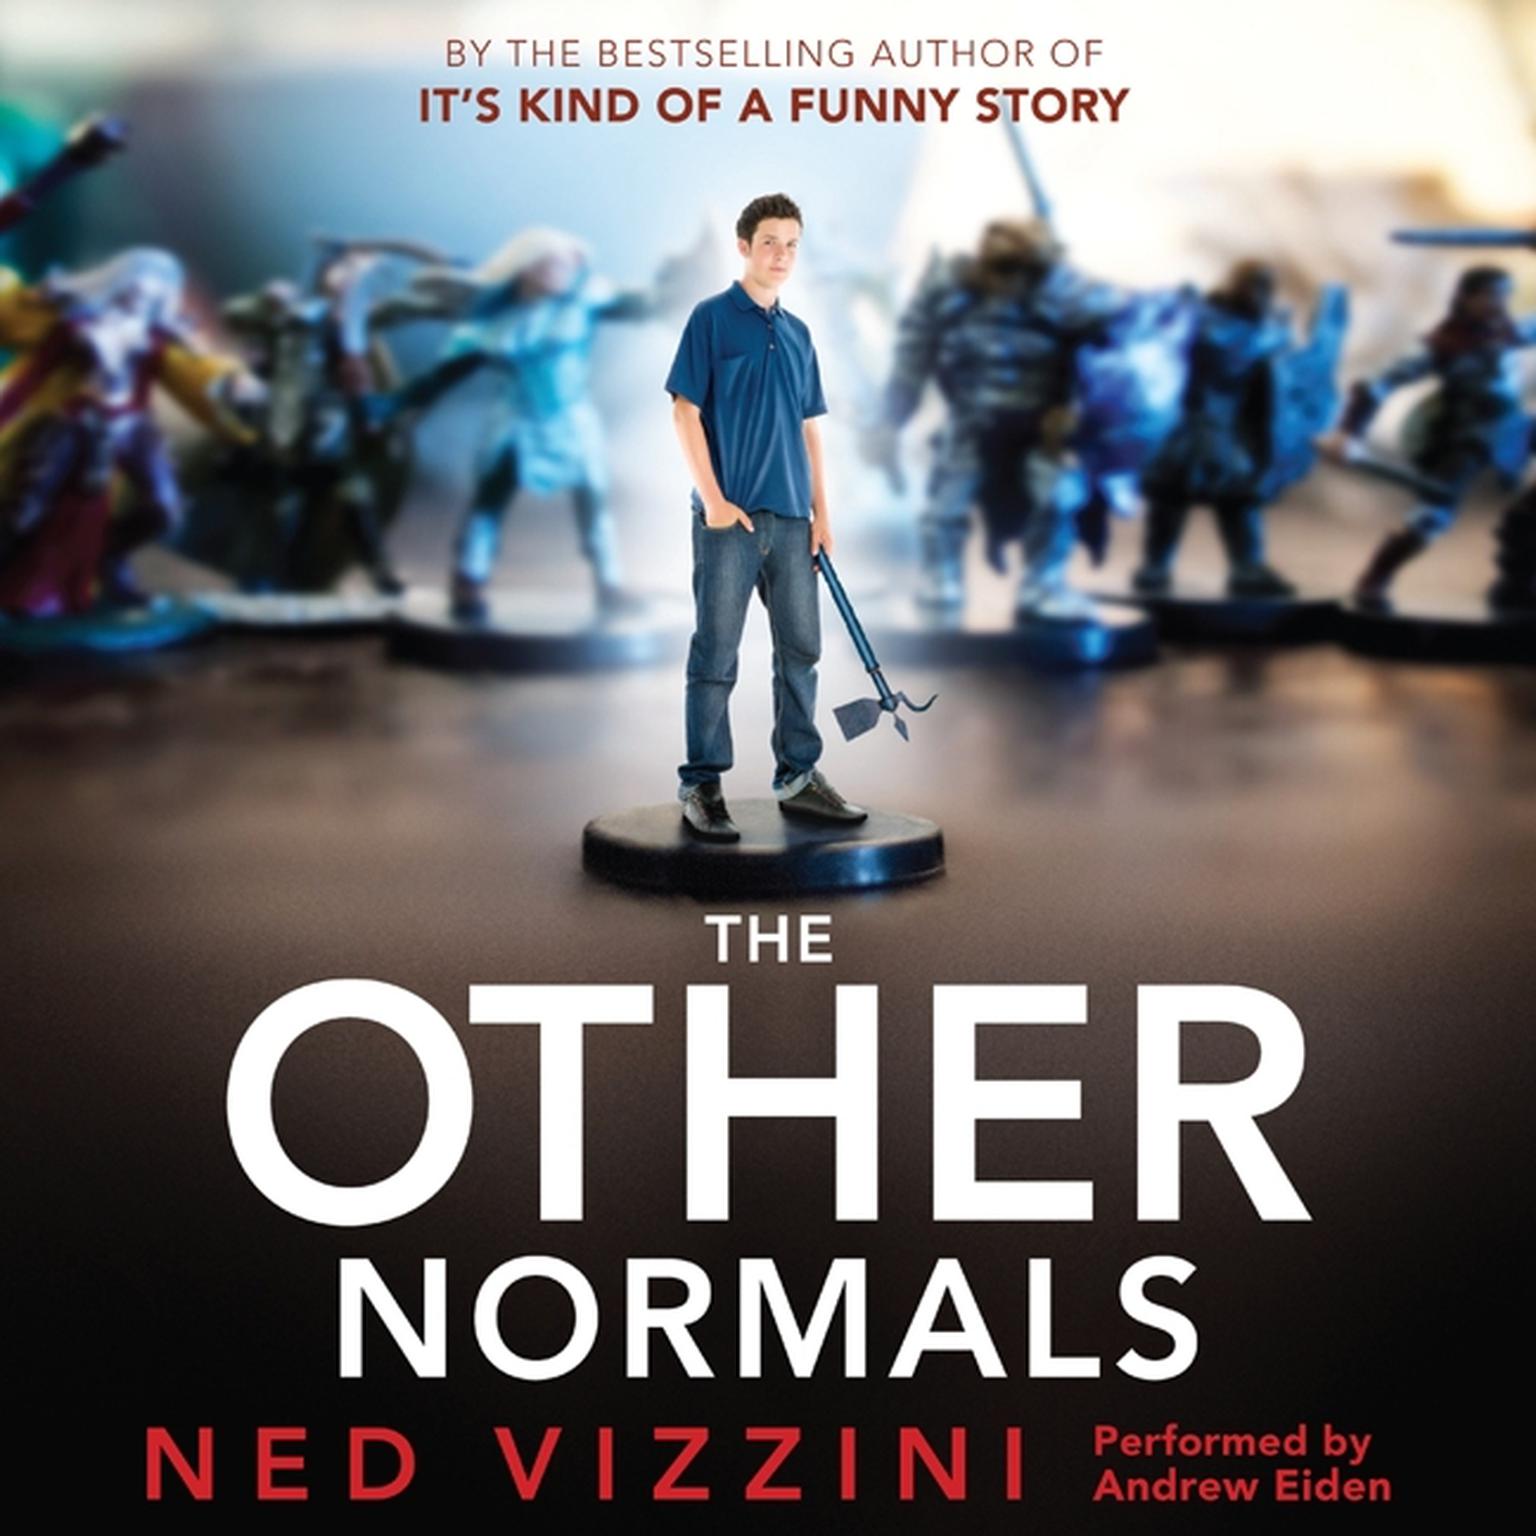 The Other Normals Audiobook, by Ned Vizzini